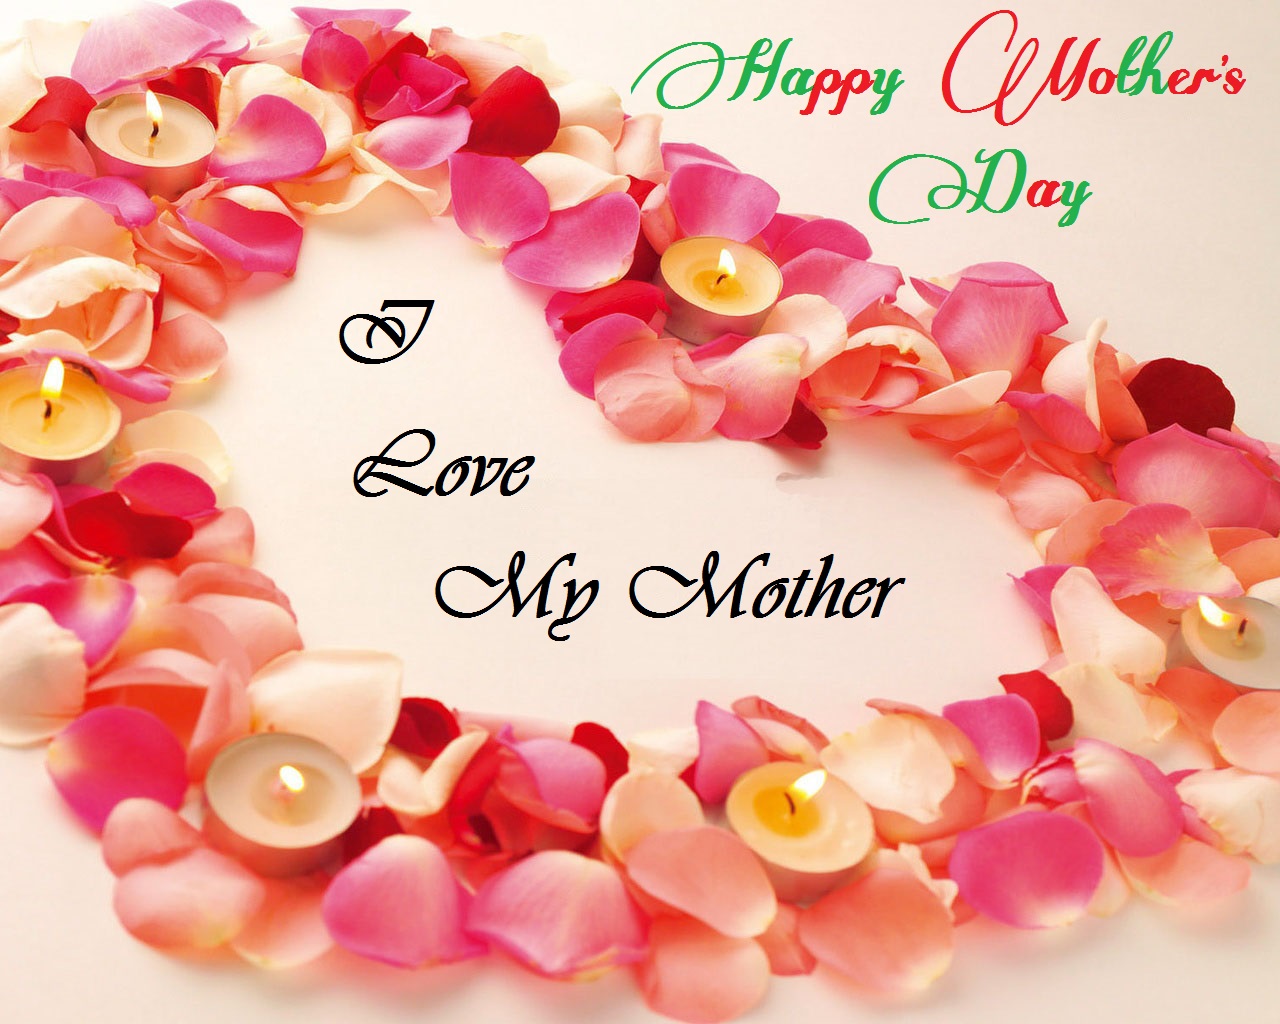 Happy Mothers Day Greeting Cards 2016 - Free Download 